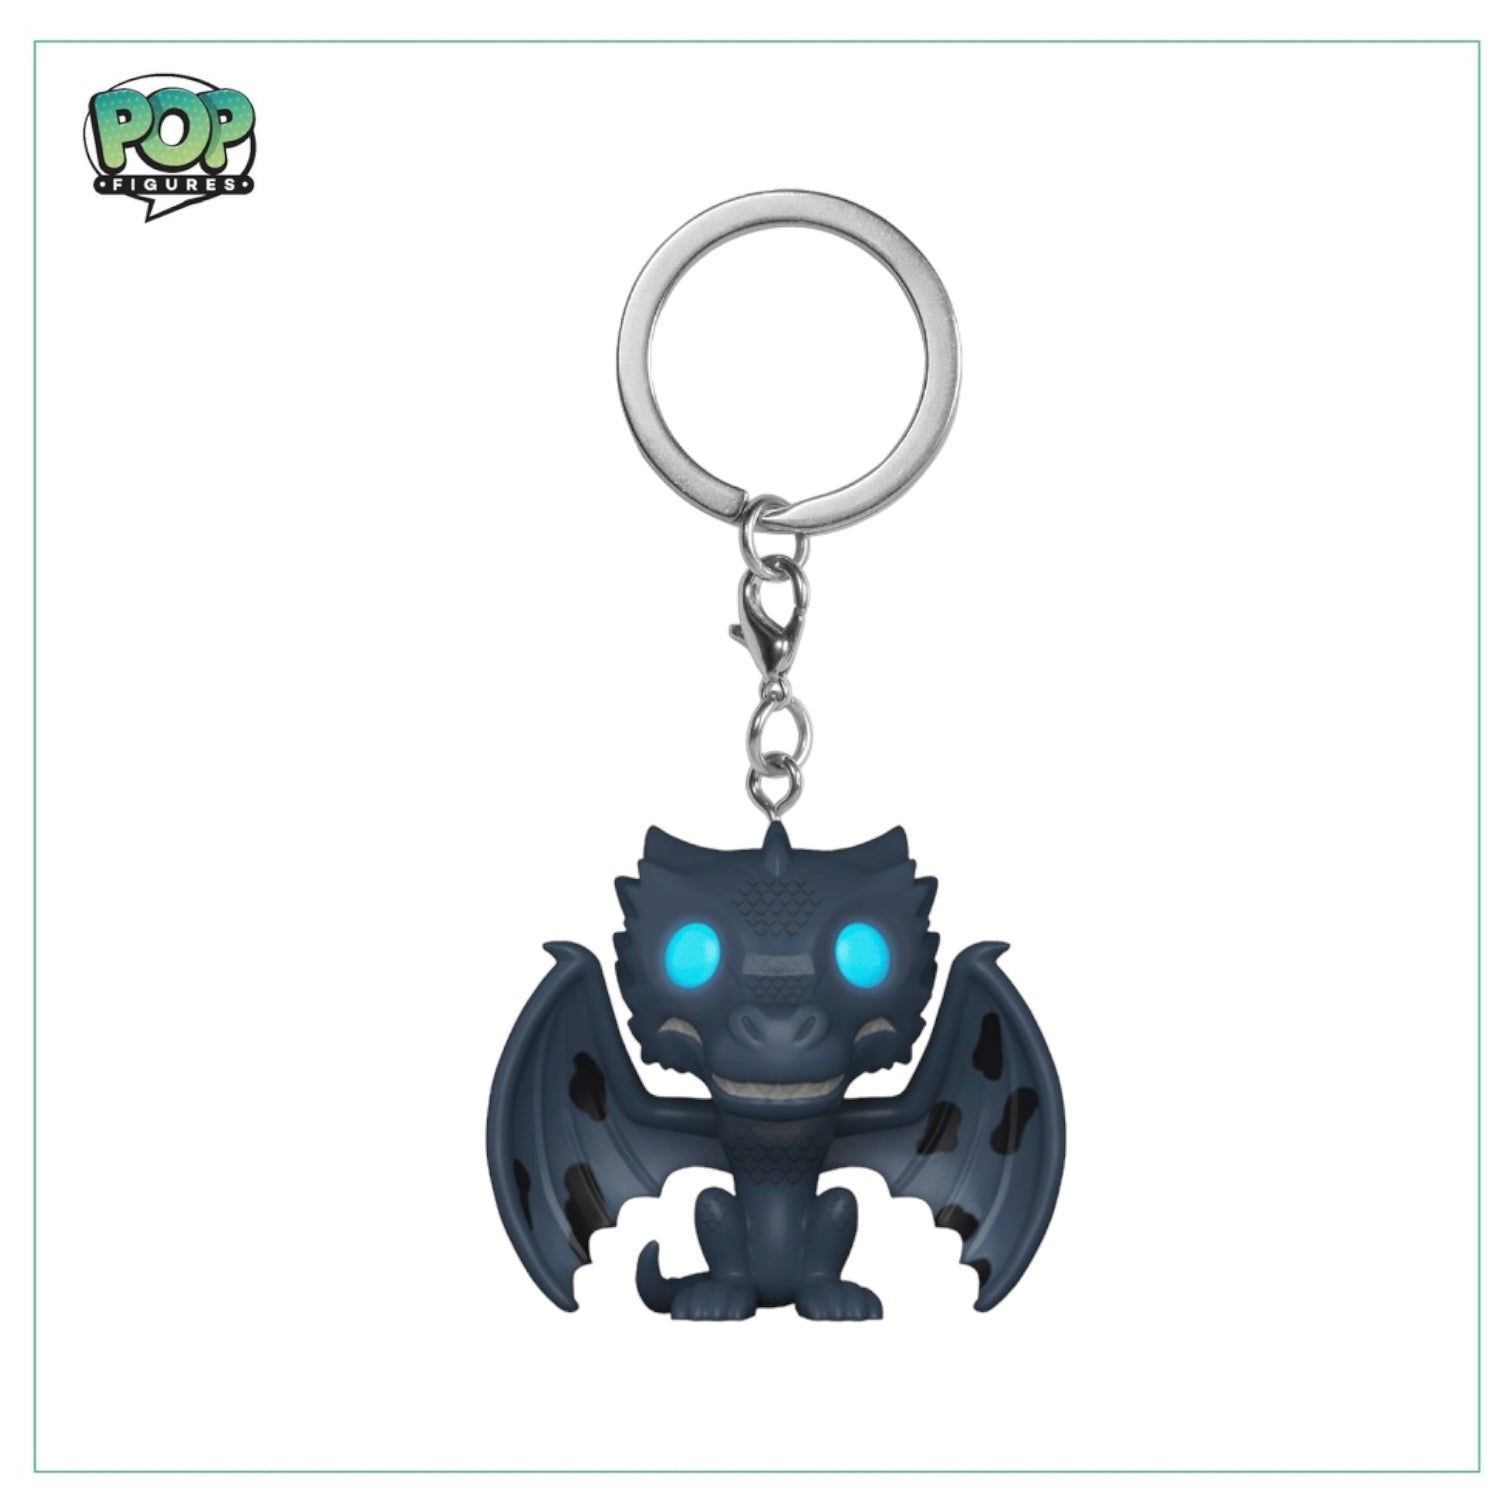 Icy Viserion Pocket Pop Keychain! - Game Of Thrones - Television